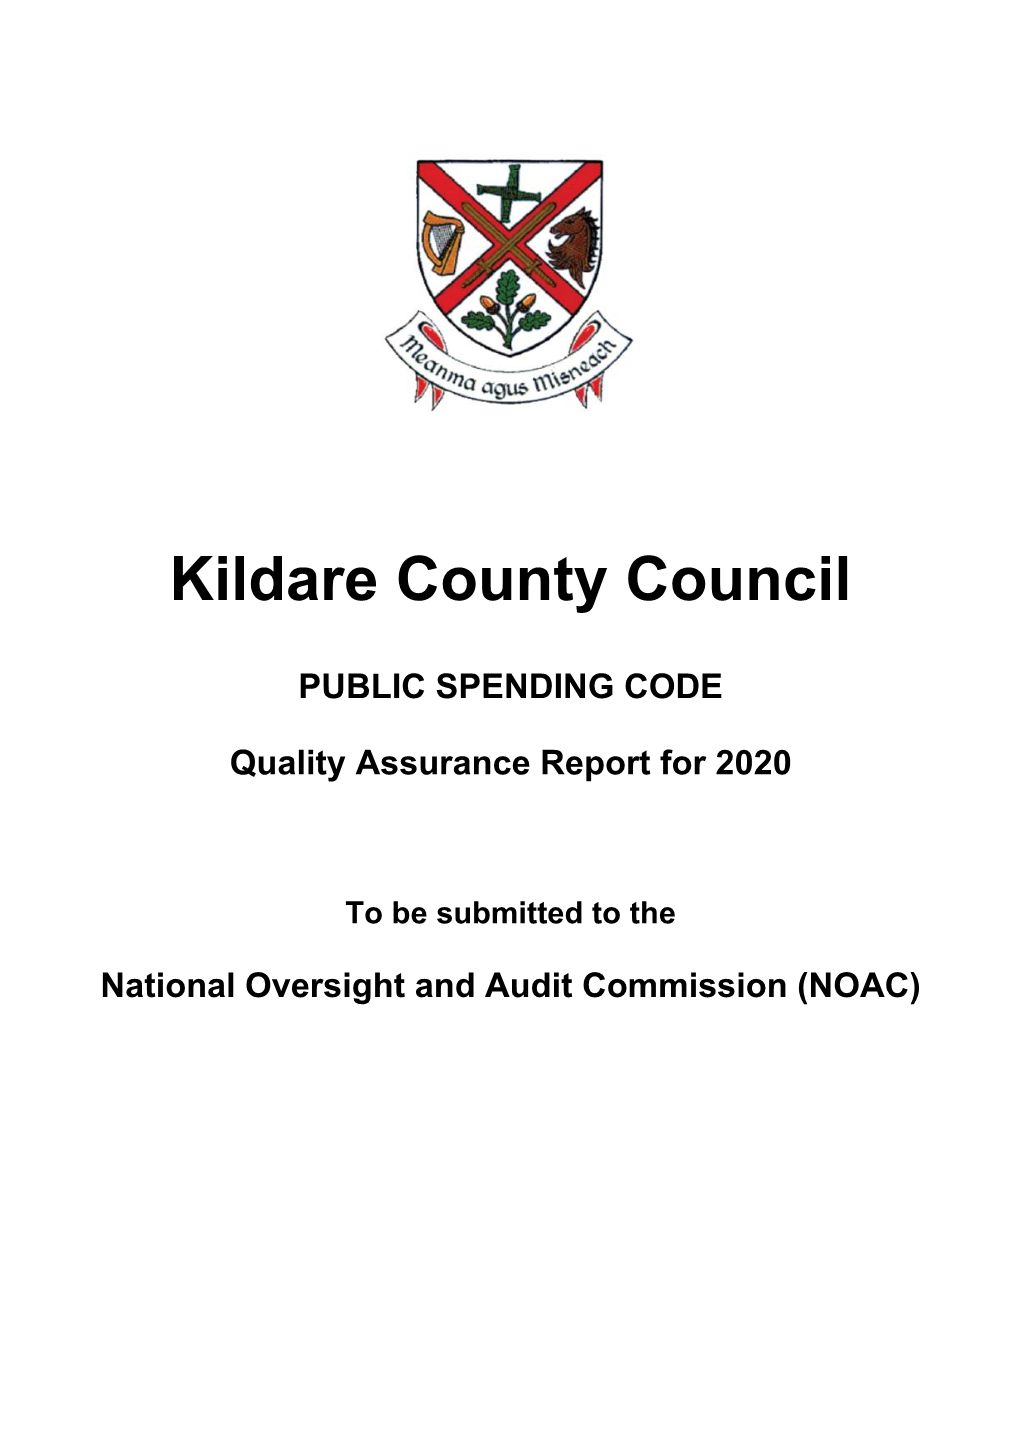 Kildare County Council's Quality Assurance Report for 2020 As